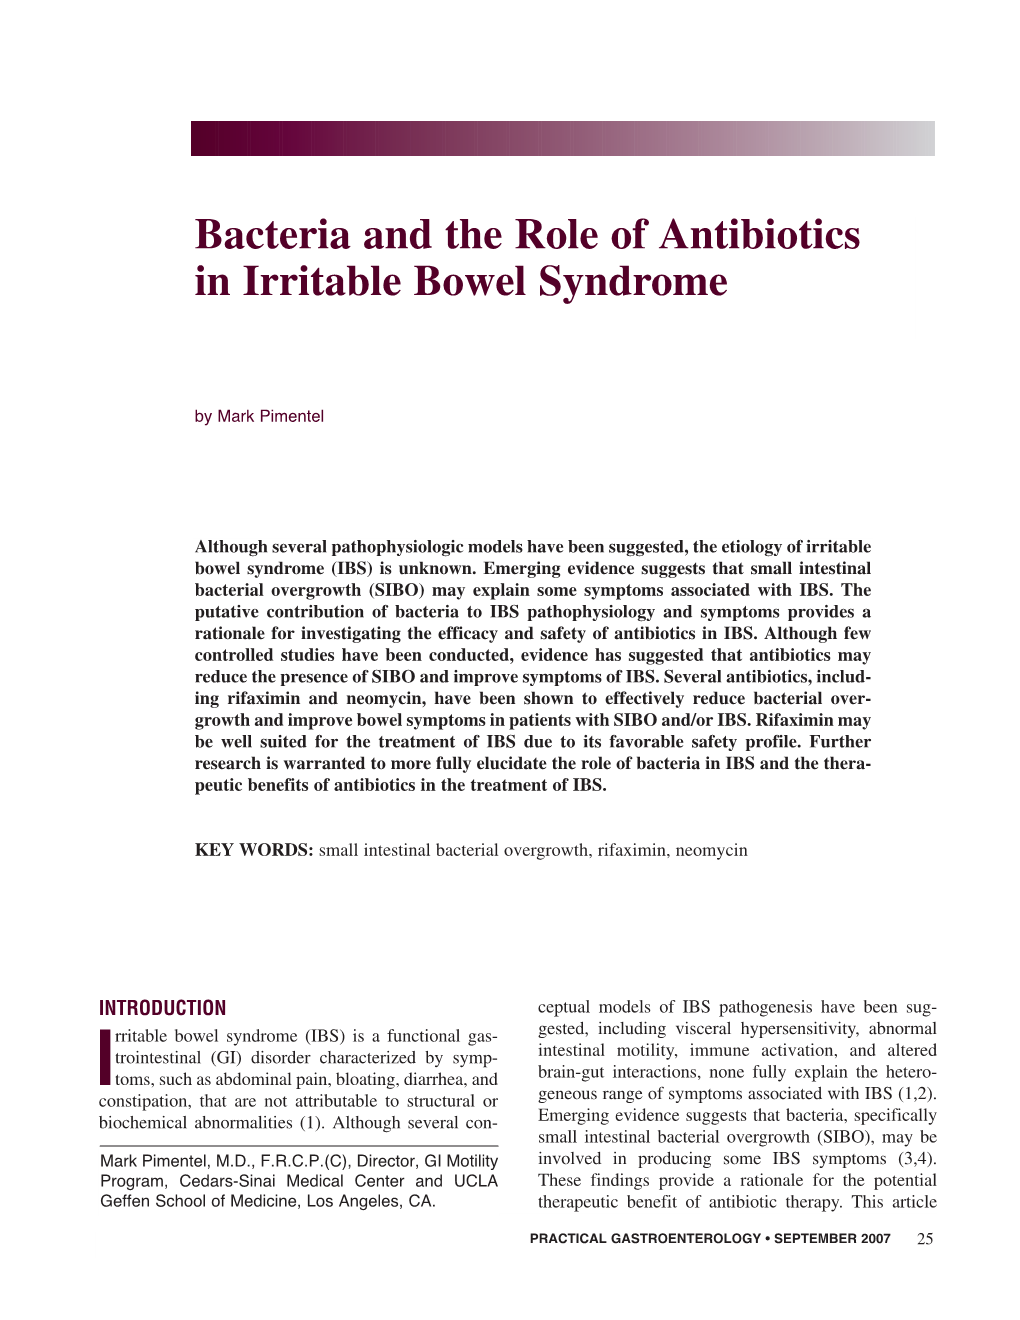 Bacteria and the Role of Antibiotics in Irritable Bowel Syndrome